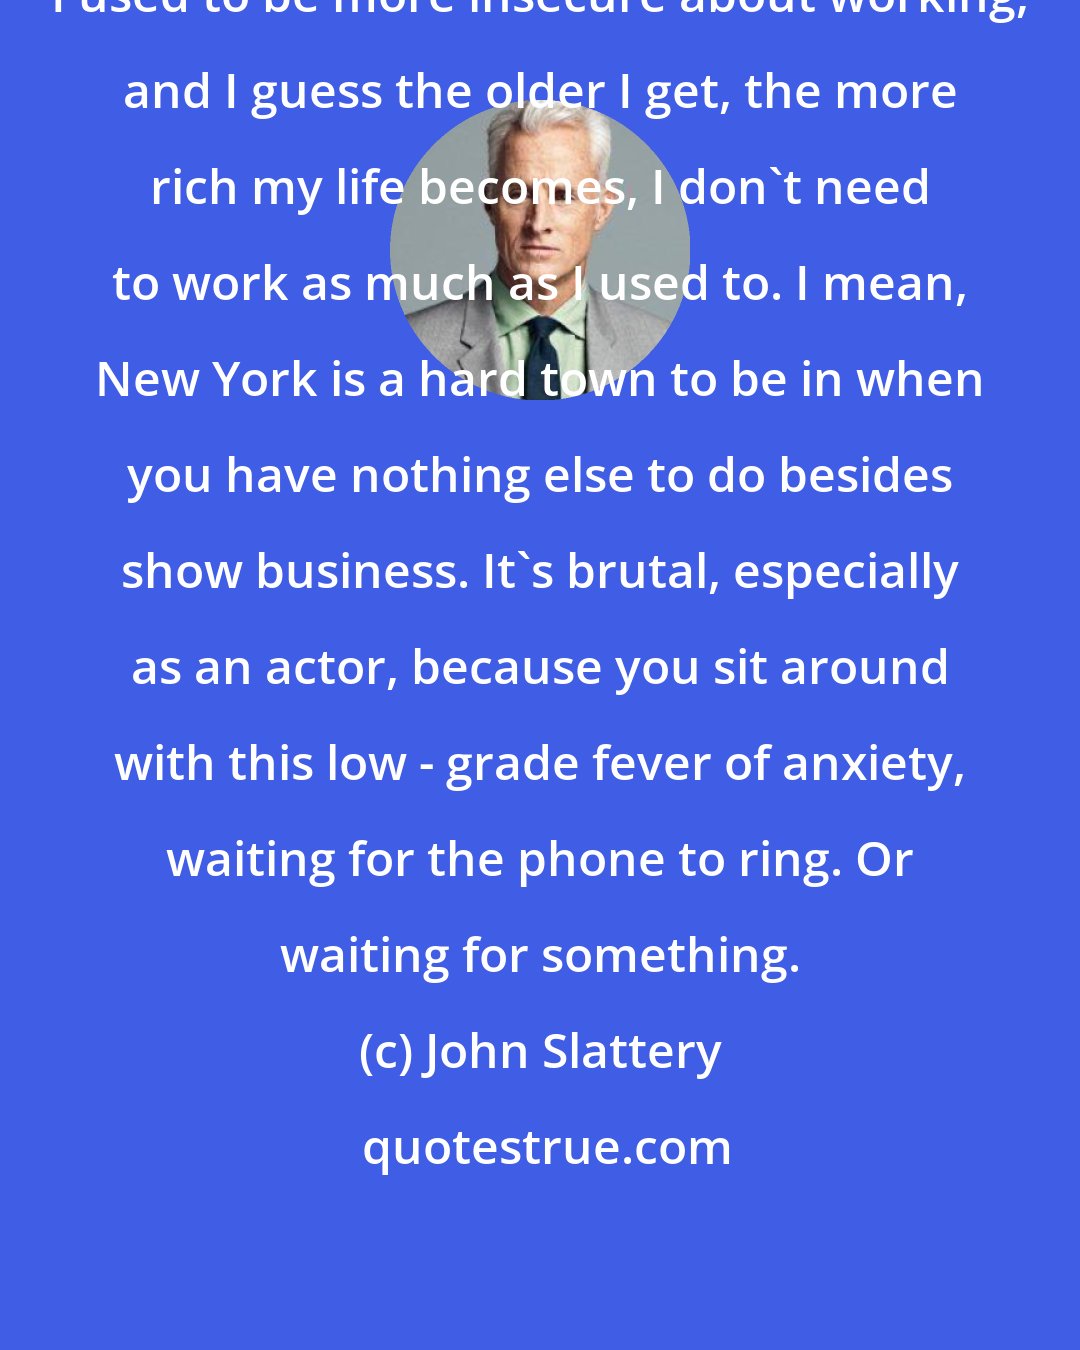 John Slattery: I used to be more insecure about working, and I guess the older I get, the more rich my life becomes, I don't need to work as much as I used to. I mean, New York is a hard town to be in when you have nothing else to do besides show business. It's brutal, especially as an actor, because you sit around with this low - grade fever of anxiety, waiting for the phone to ring. Or waiting for something.